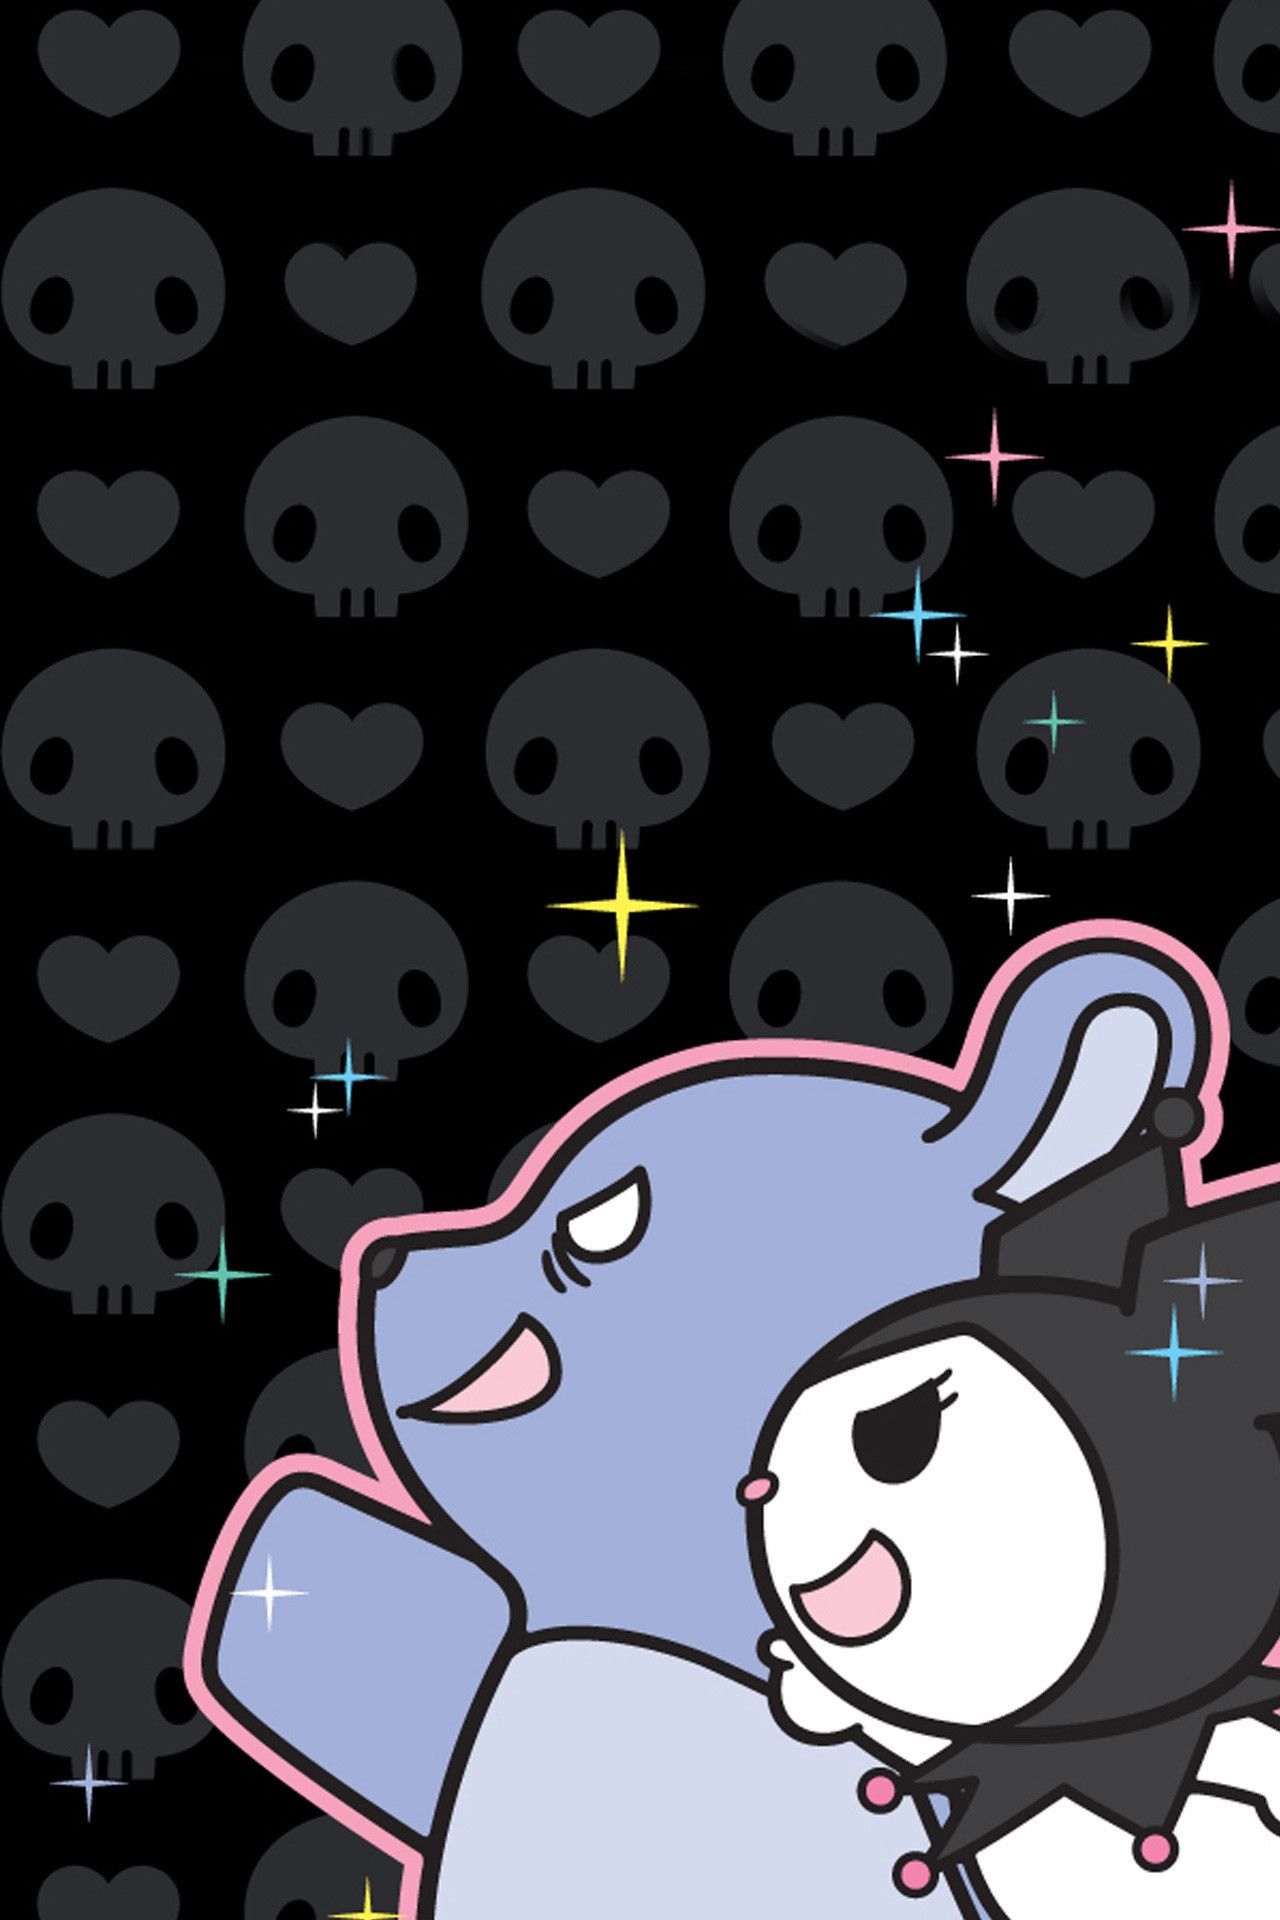 IPhone wallpaper with cute rabbit and panda in front of a black background with skulls - Kuromi, Sanrio, Keroppi